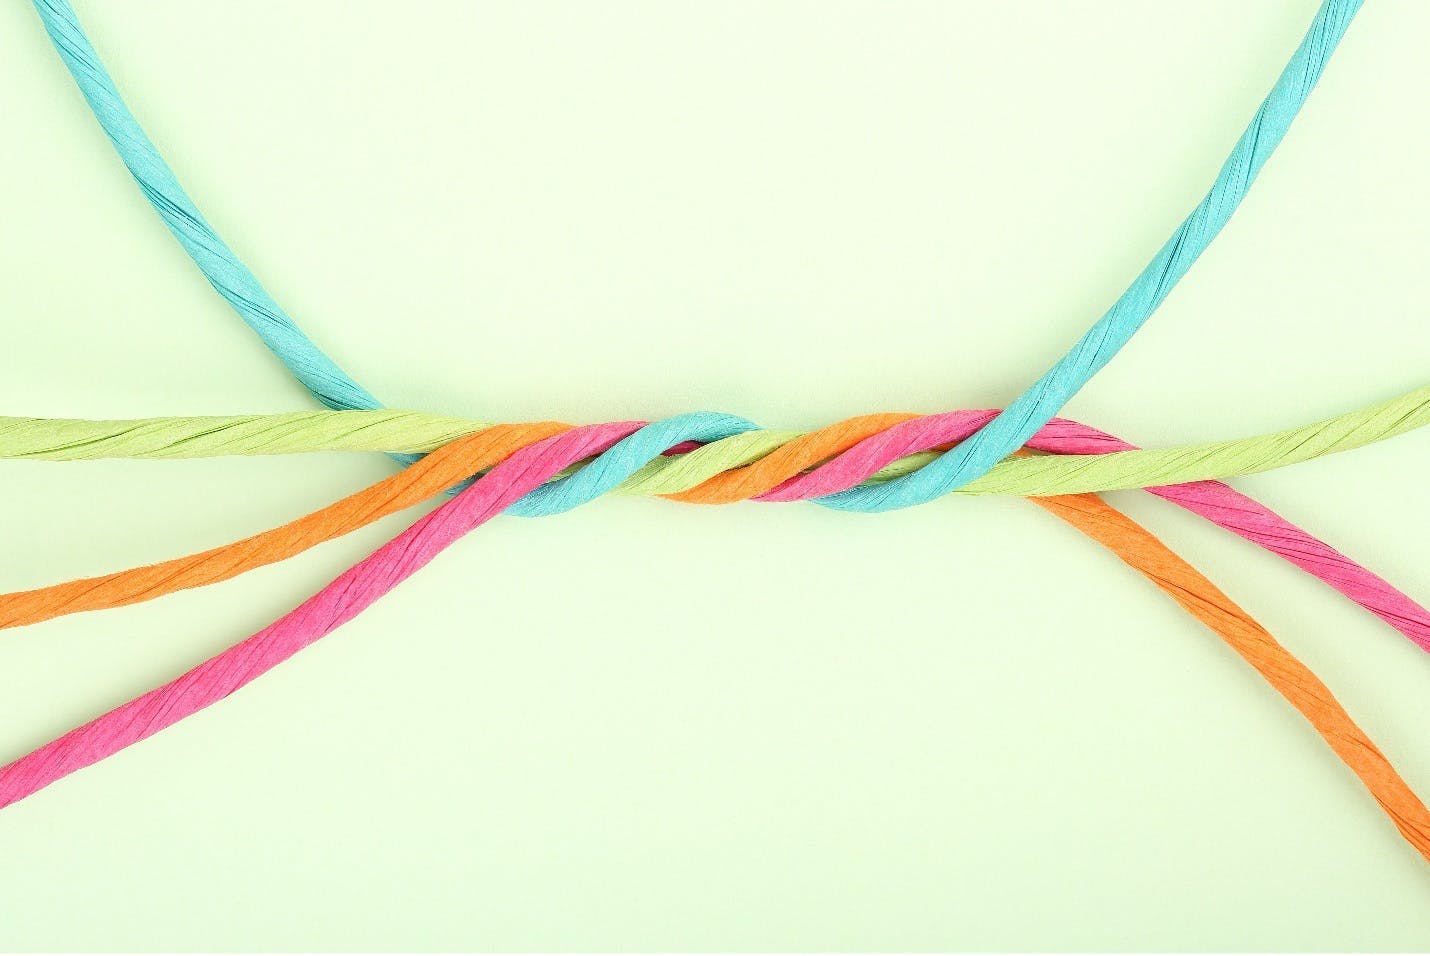 Blue, green, orange, and pink strings twisting around each other.